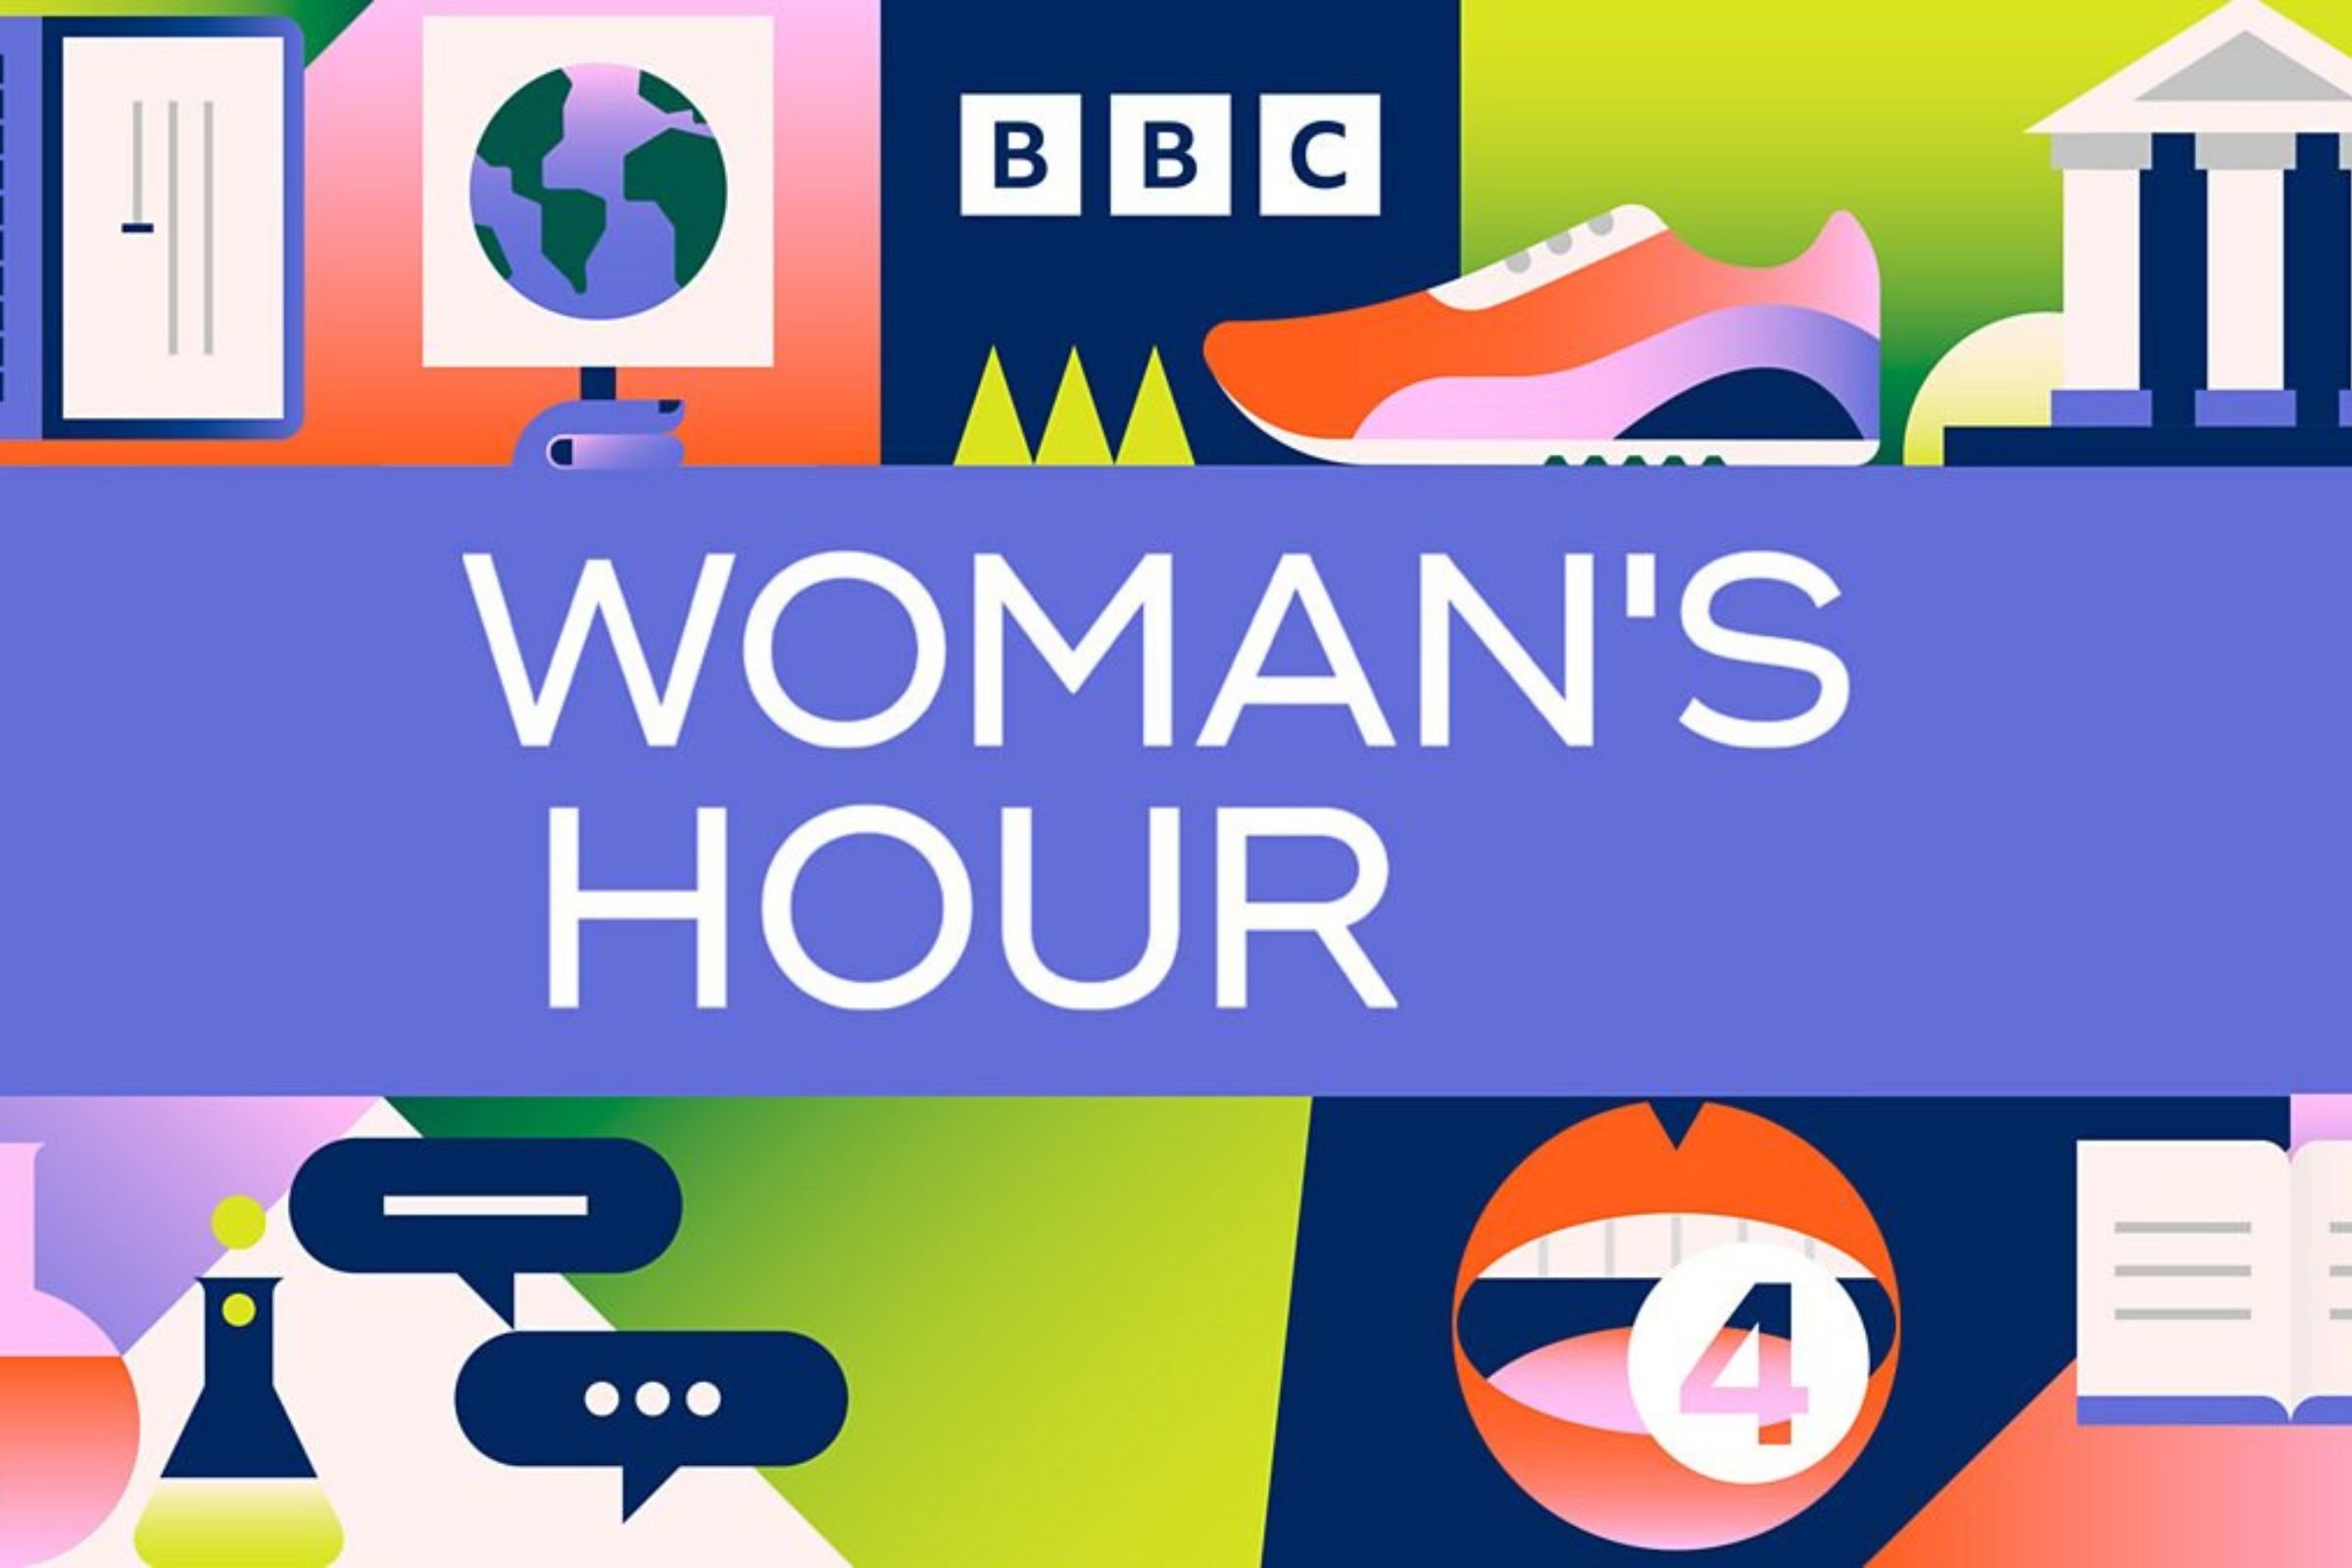 Dr Kathryn Mannix discusses Dying for Beginners on Woman's Hour